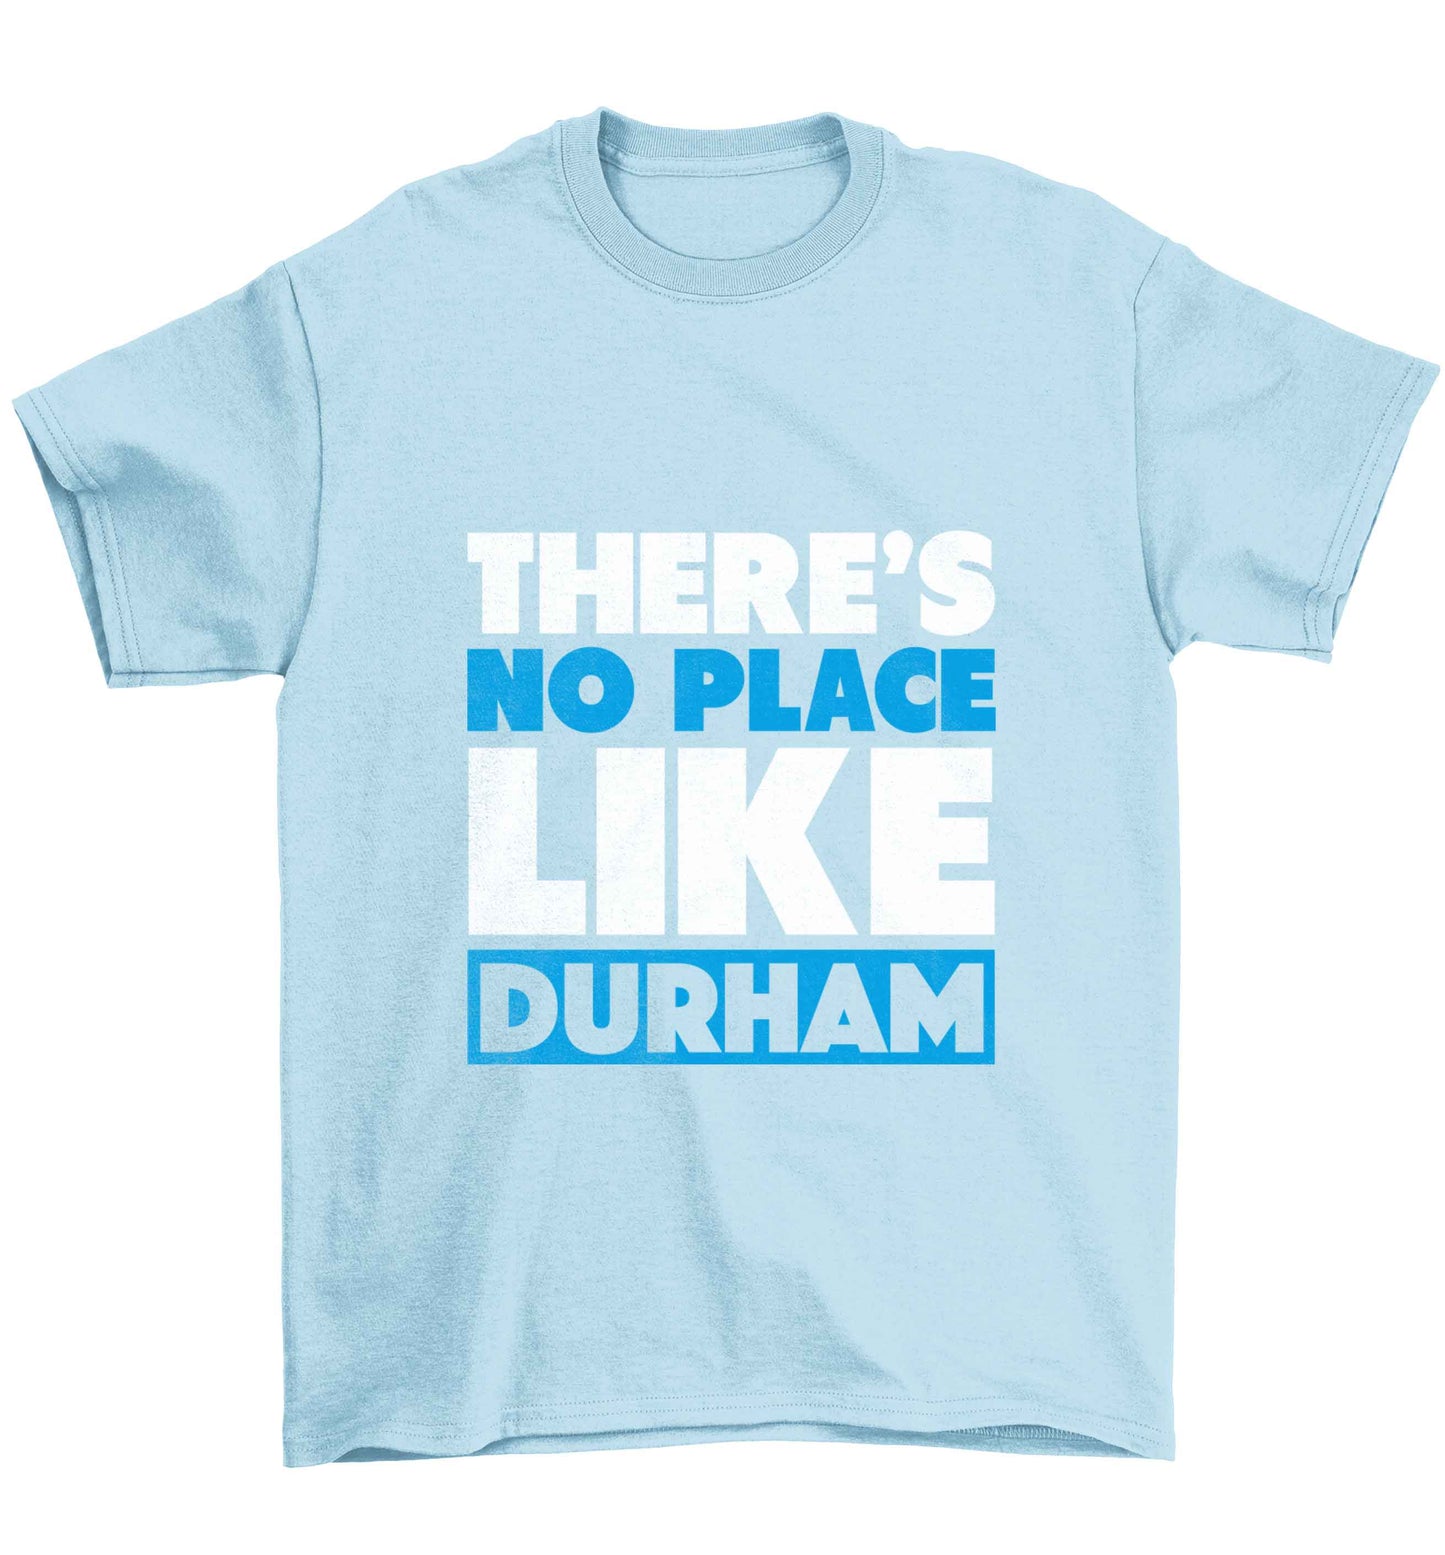 There's no place like Durham Children's light blue Tshirt 12-13 Years